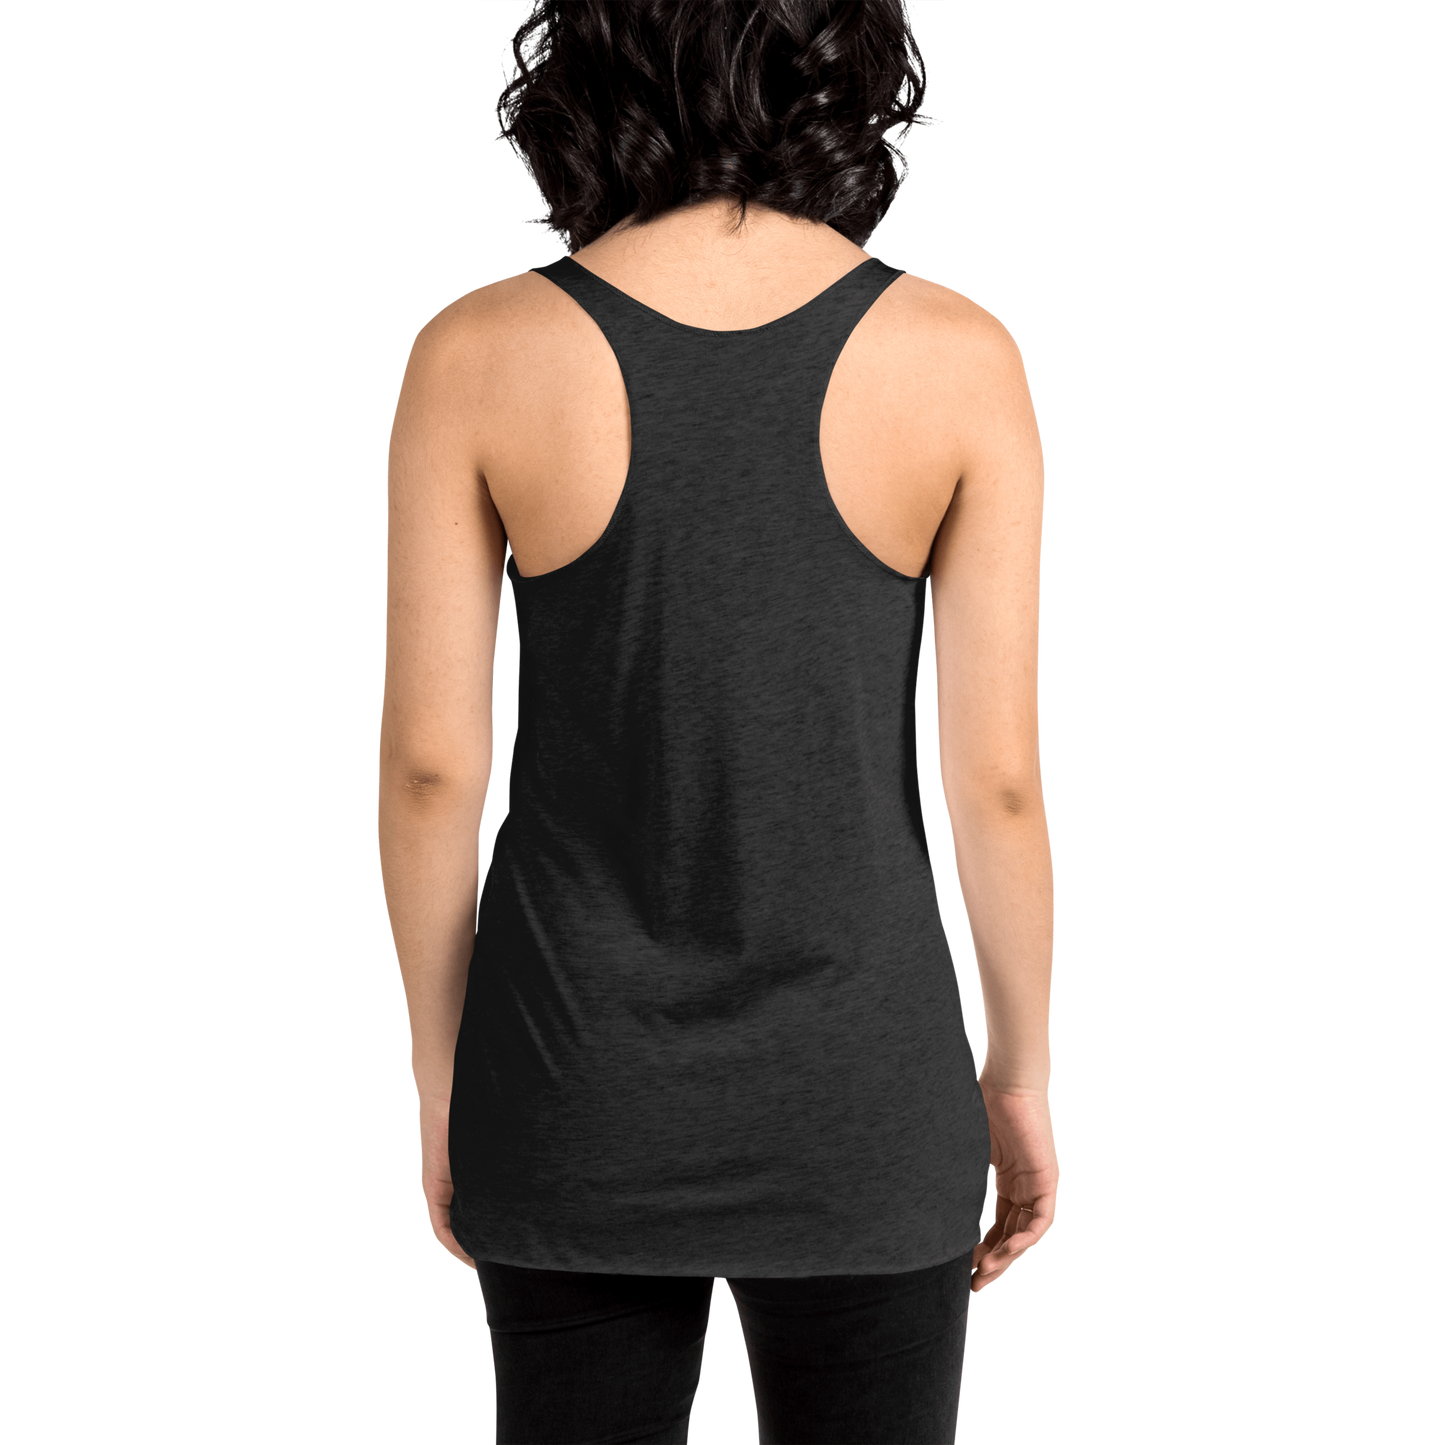 introverted but willing to discuss cats. - Women's Racerback Tank